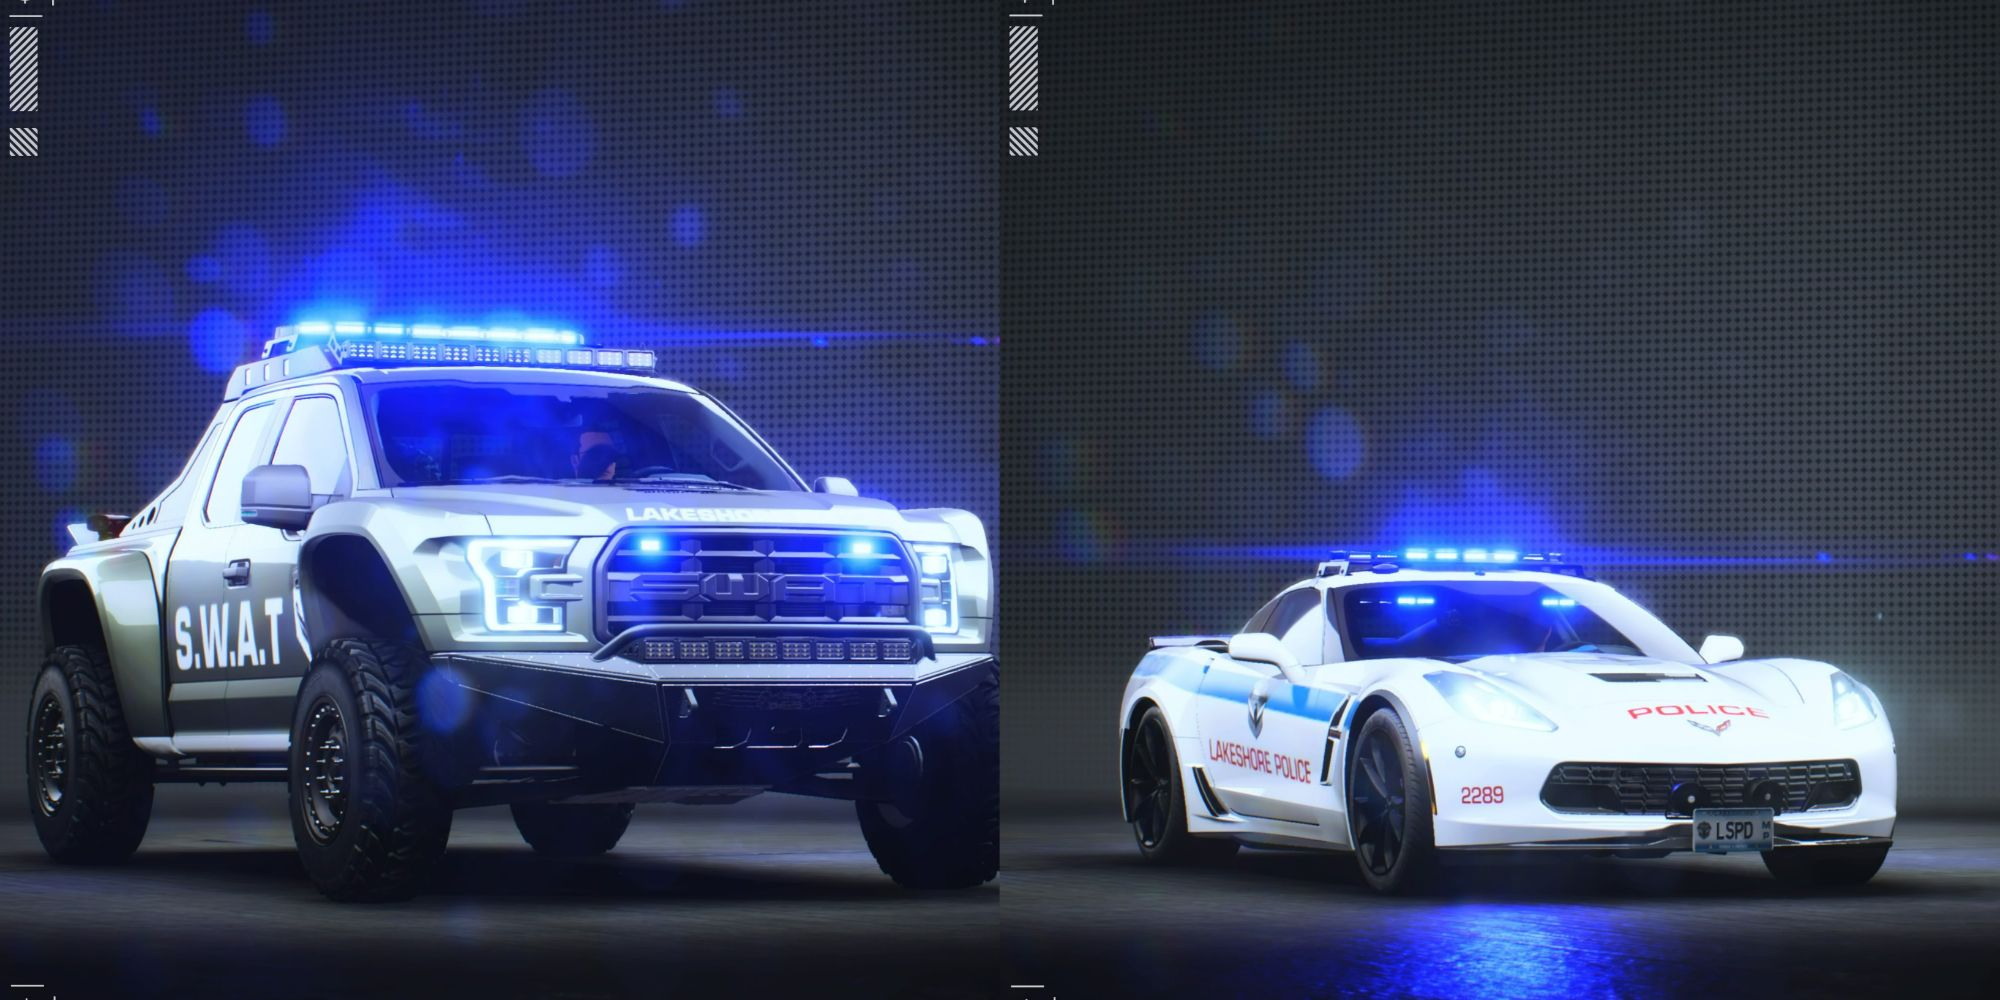 Need For Speed Unbound split image of two cop cars